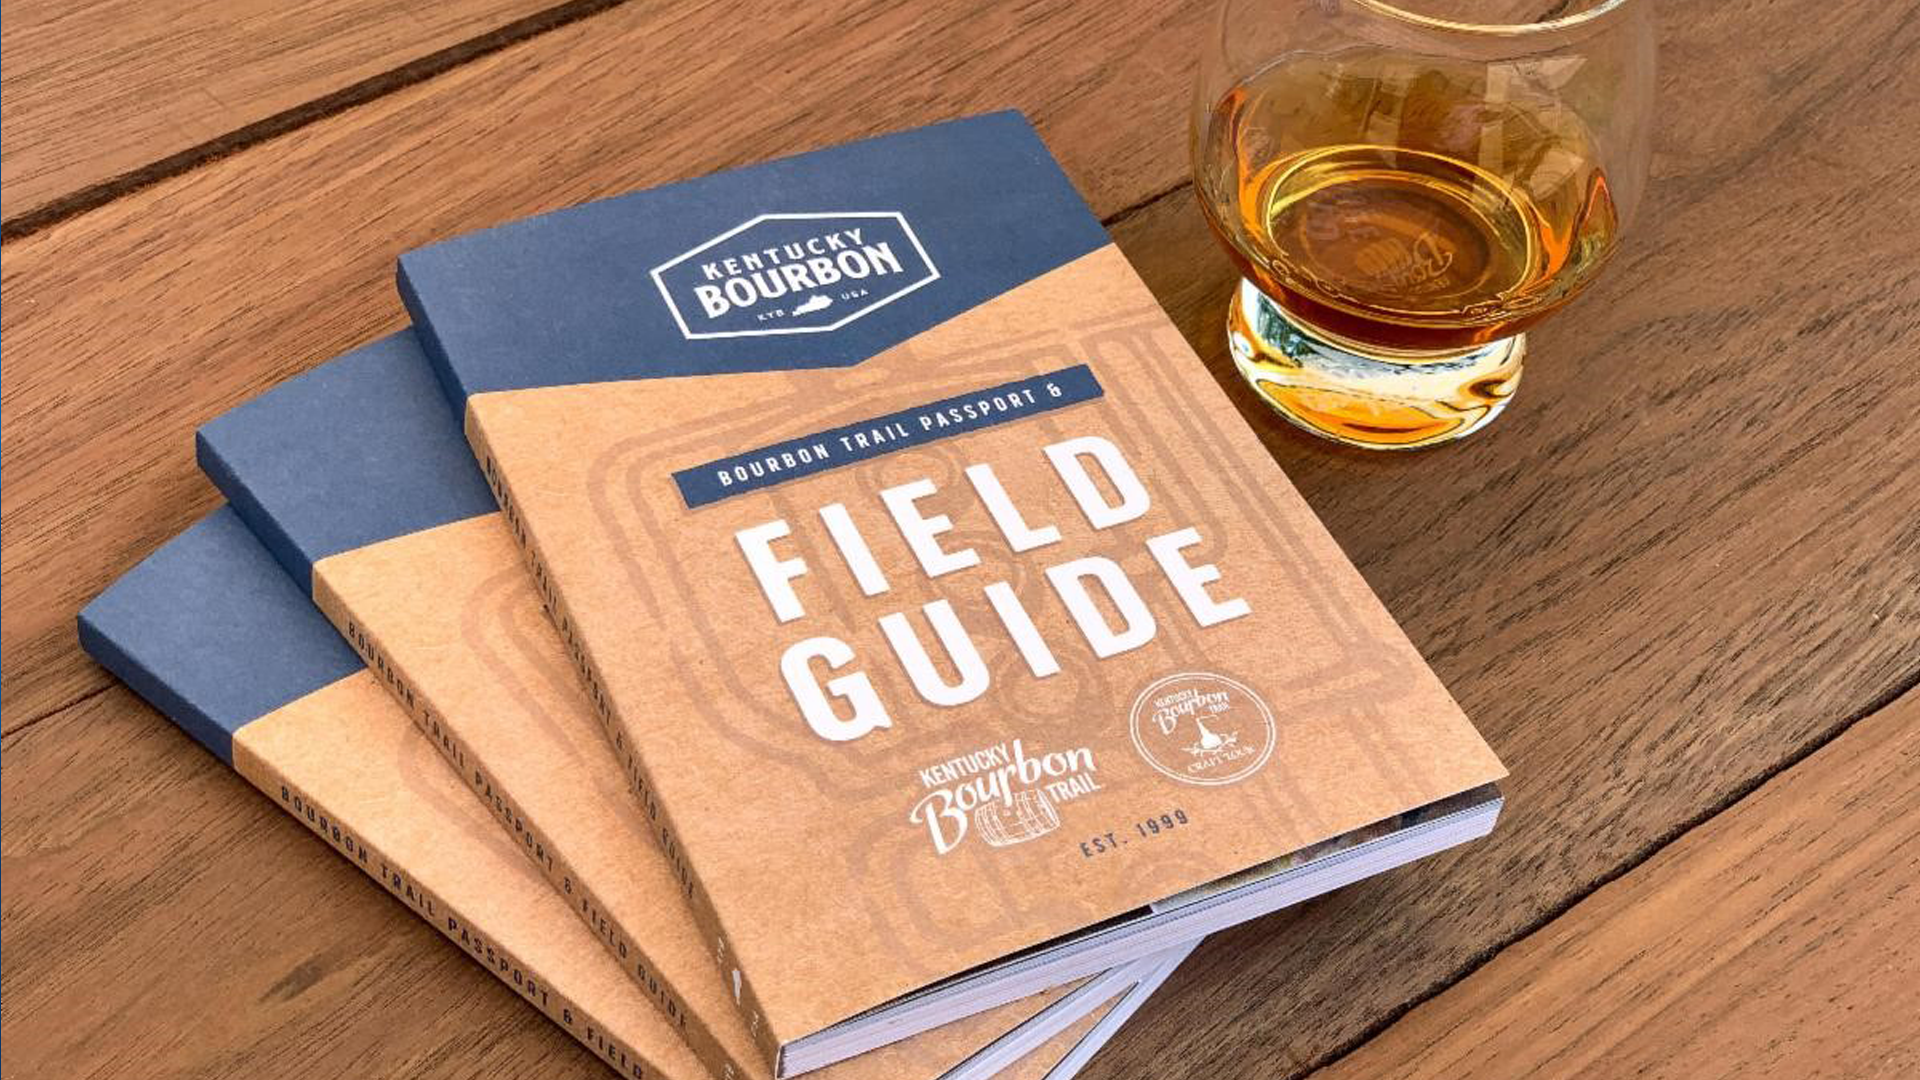 In celebration of the Kentucky Bourbon Trail's 22nd year in operation, they unveiled a new passport program to reward visitors with special souvenirs.